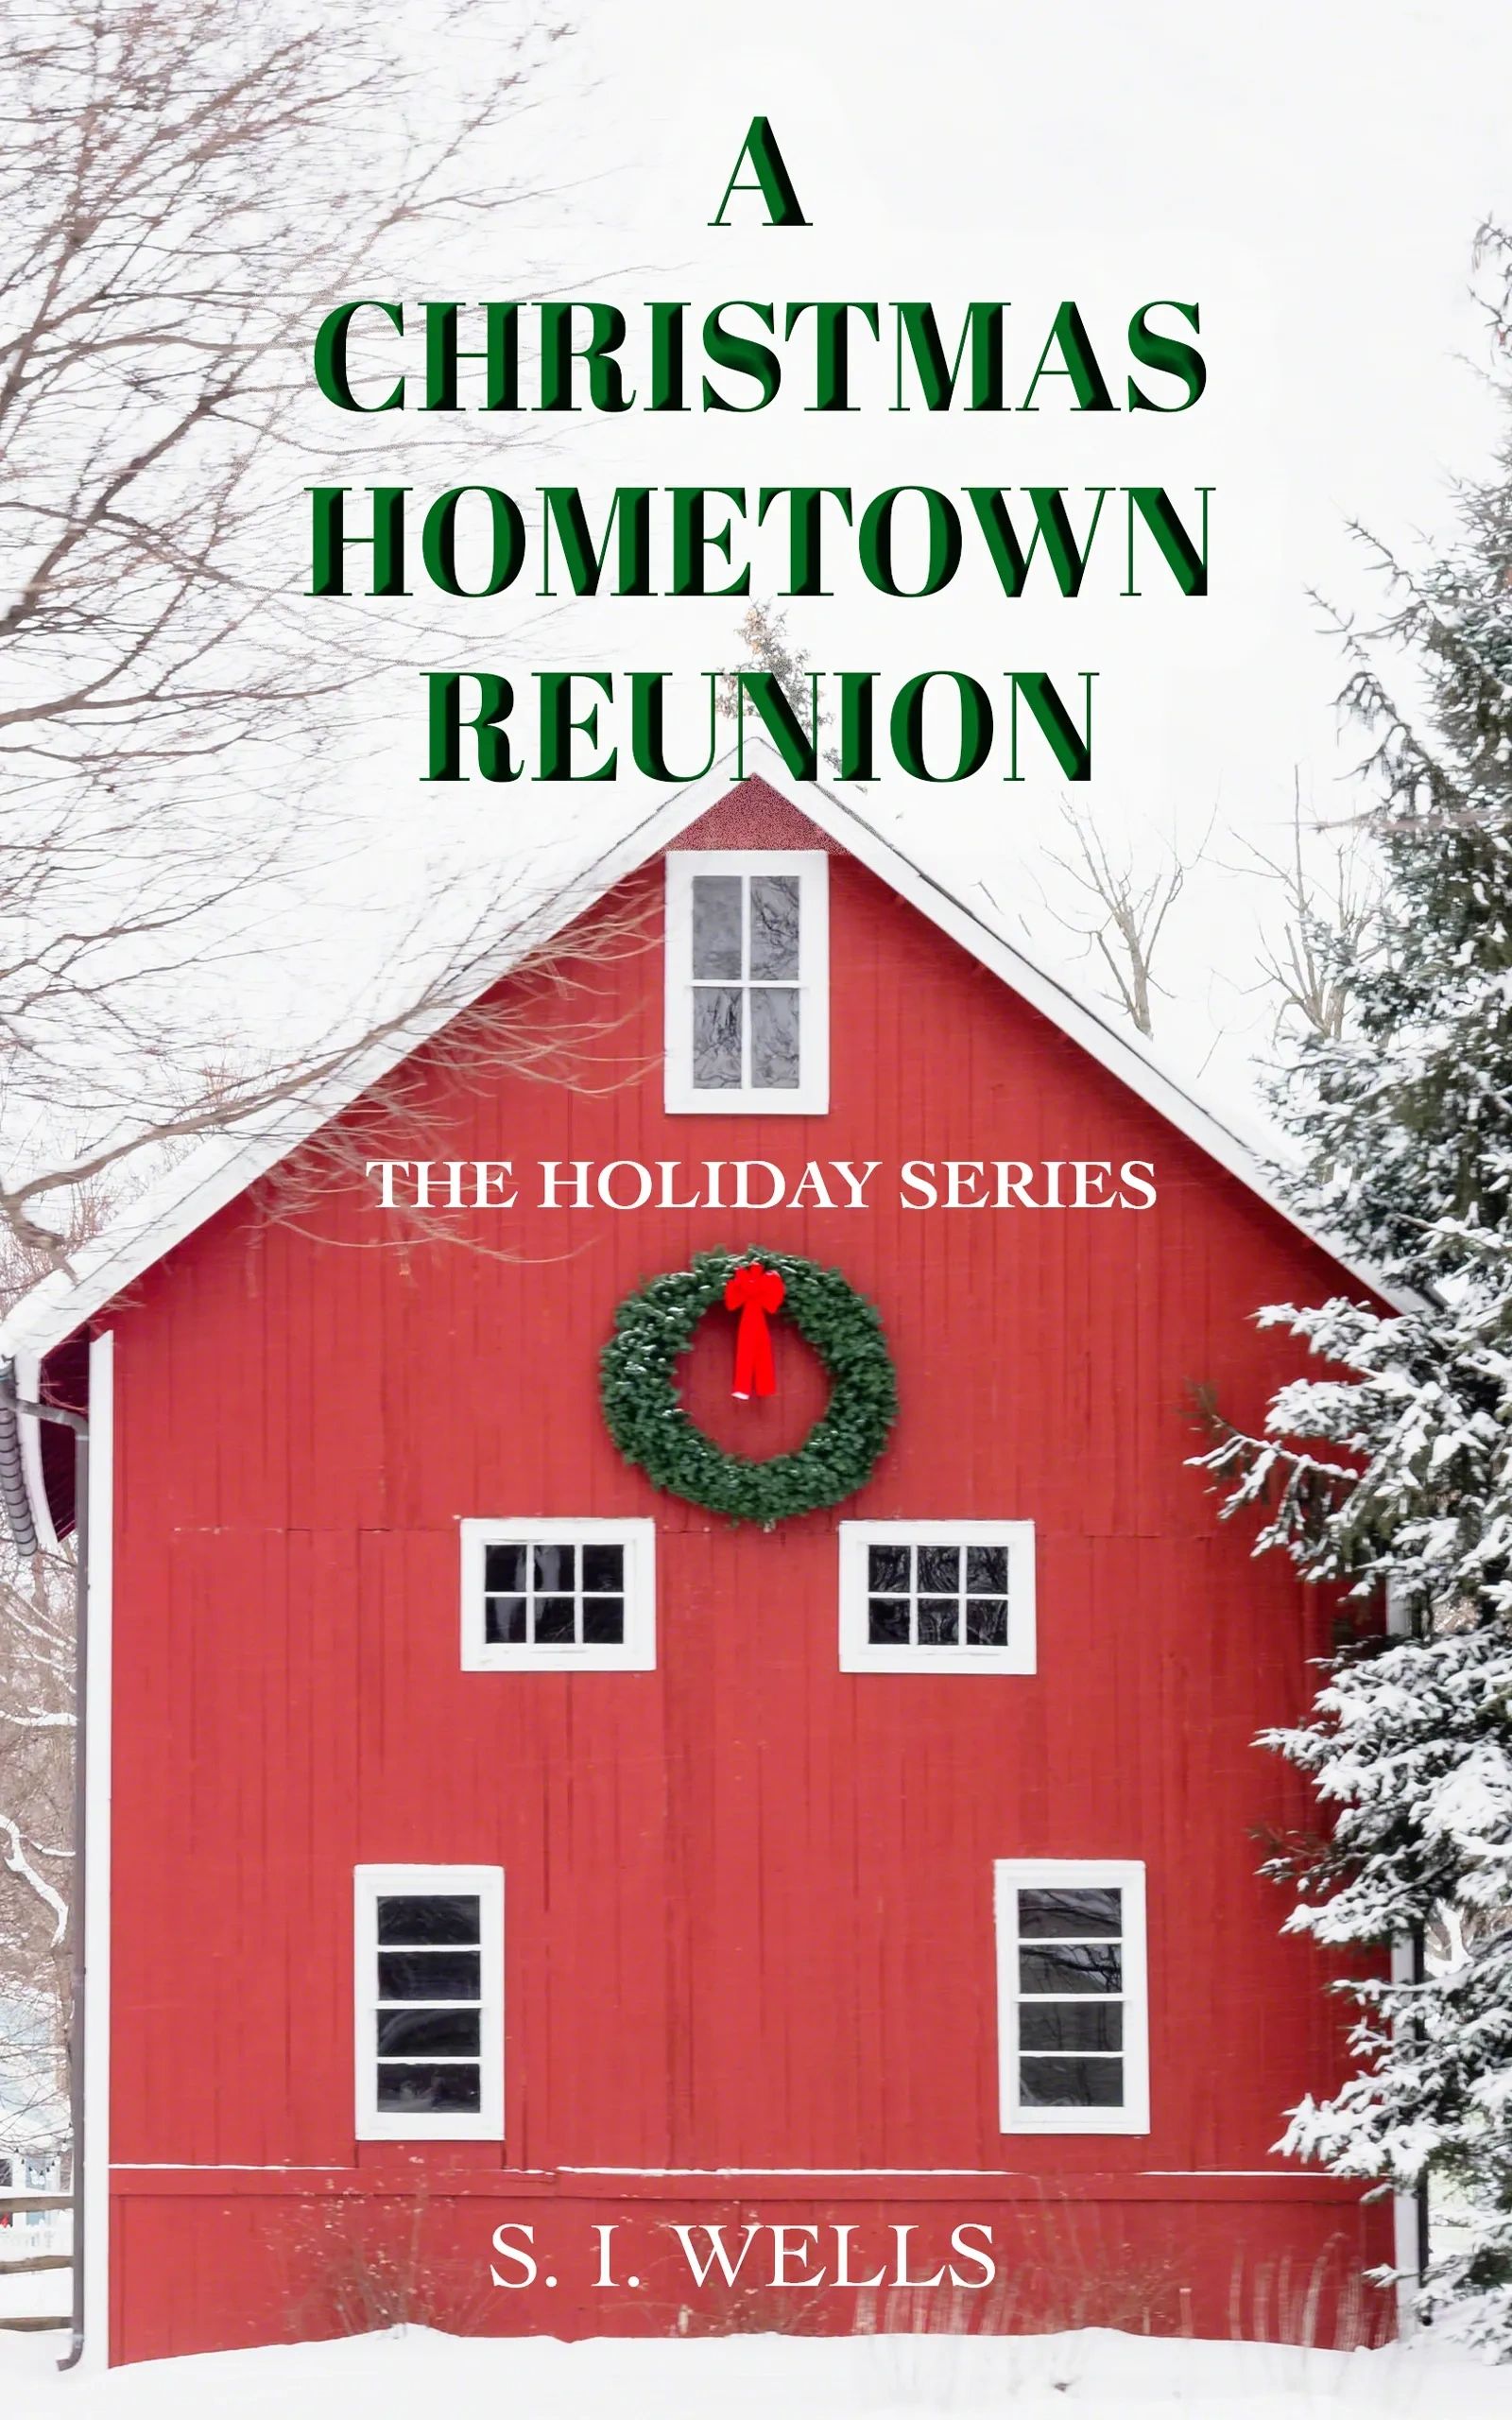 A CHRISTMAS HOMETOWN REUNION by S. I. Wells - Book Cover.